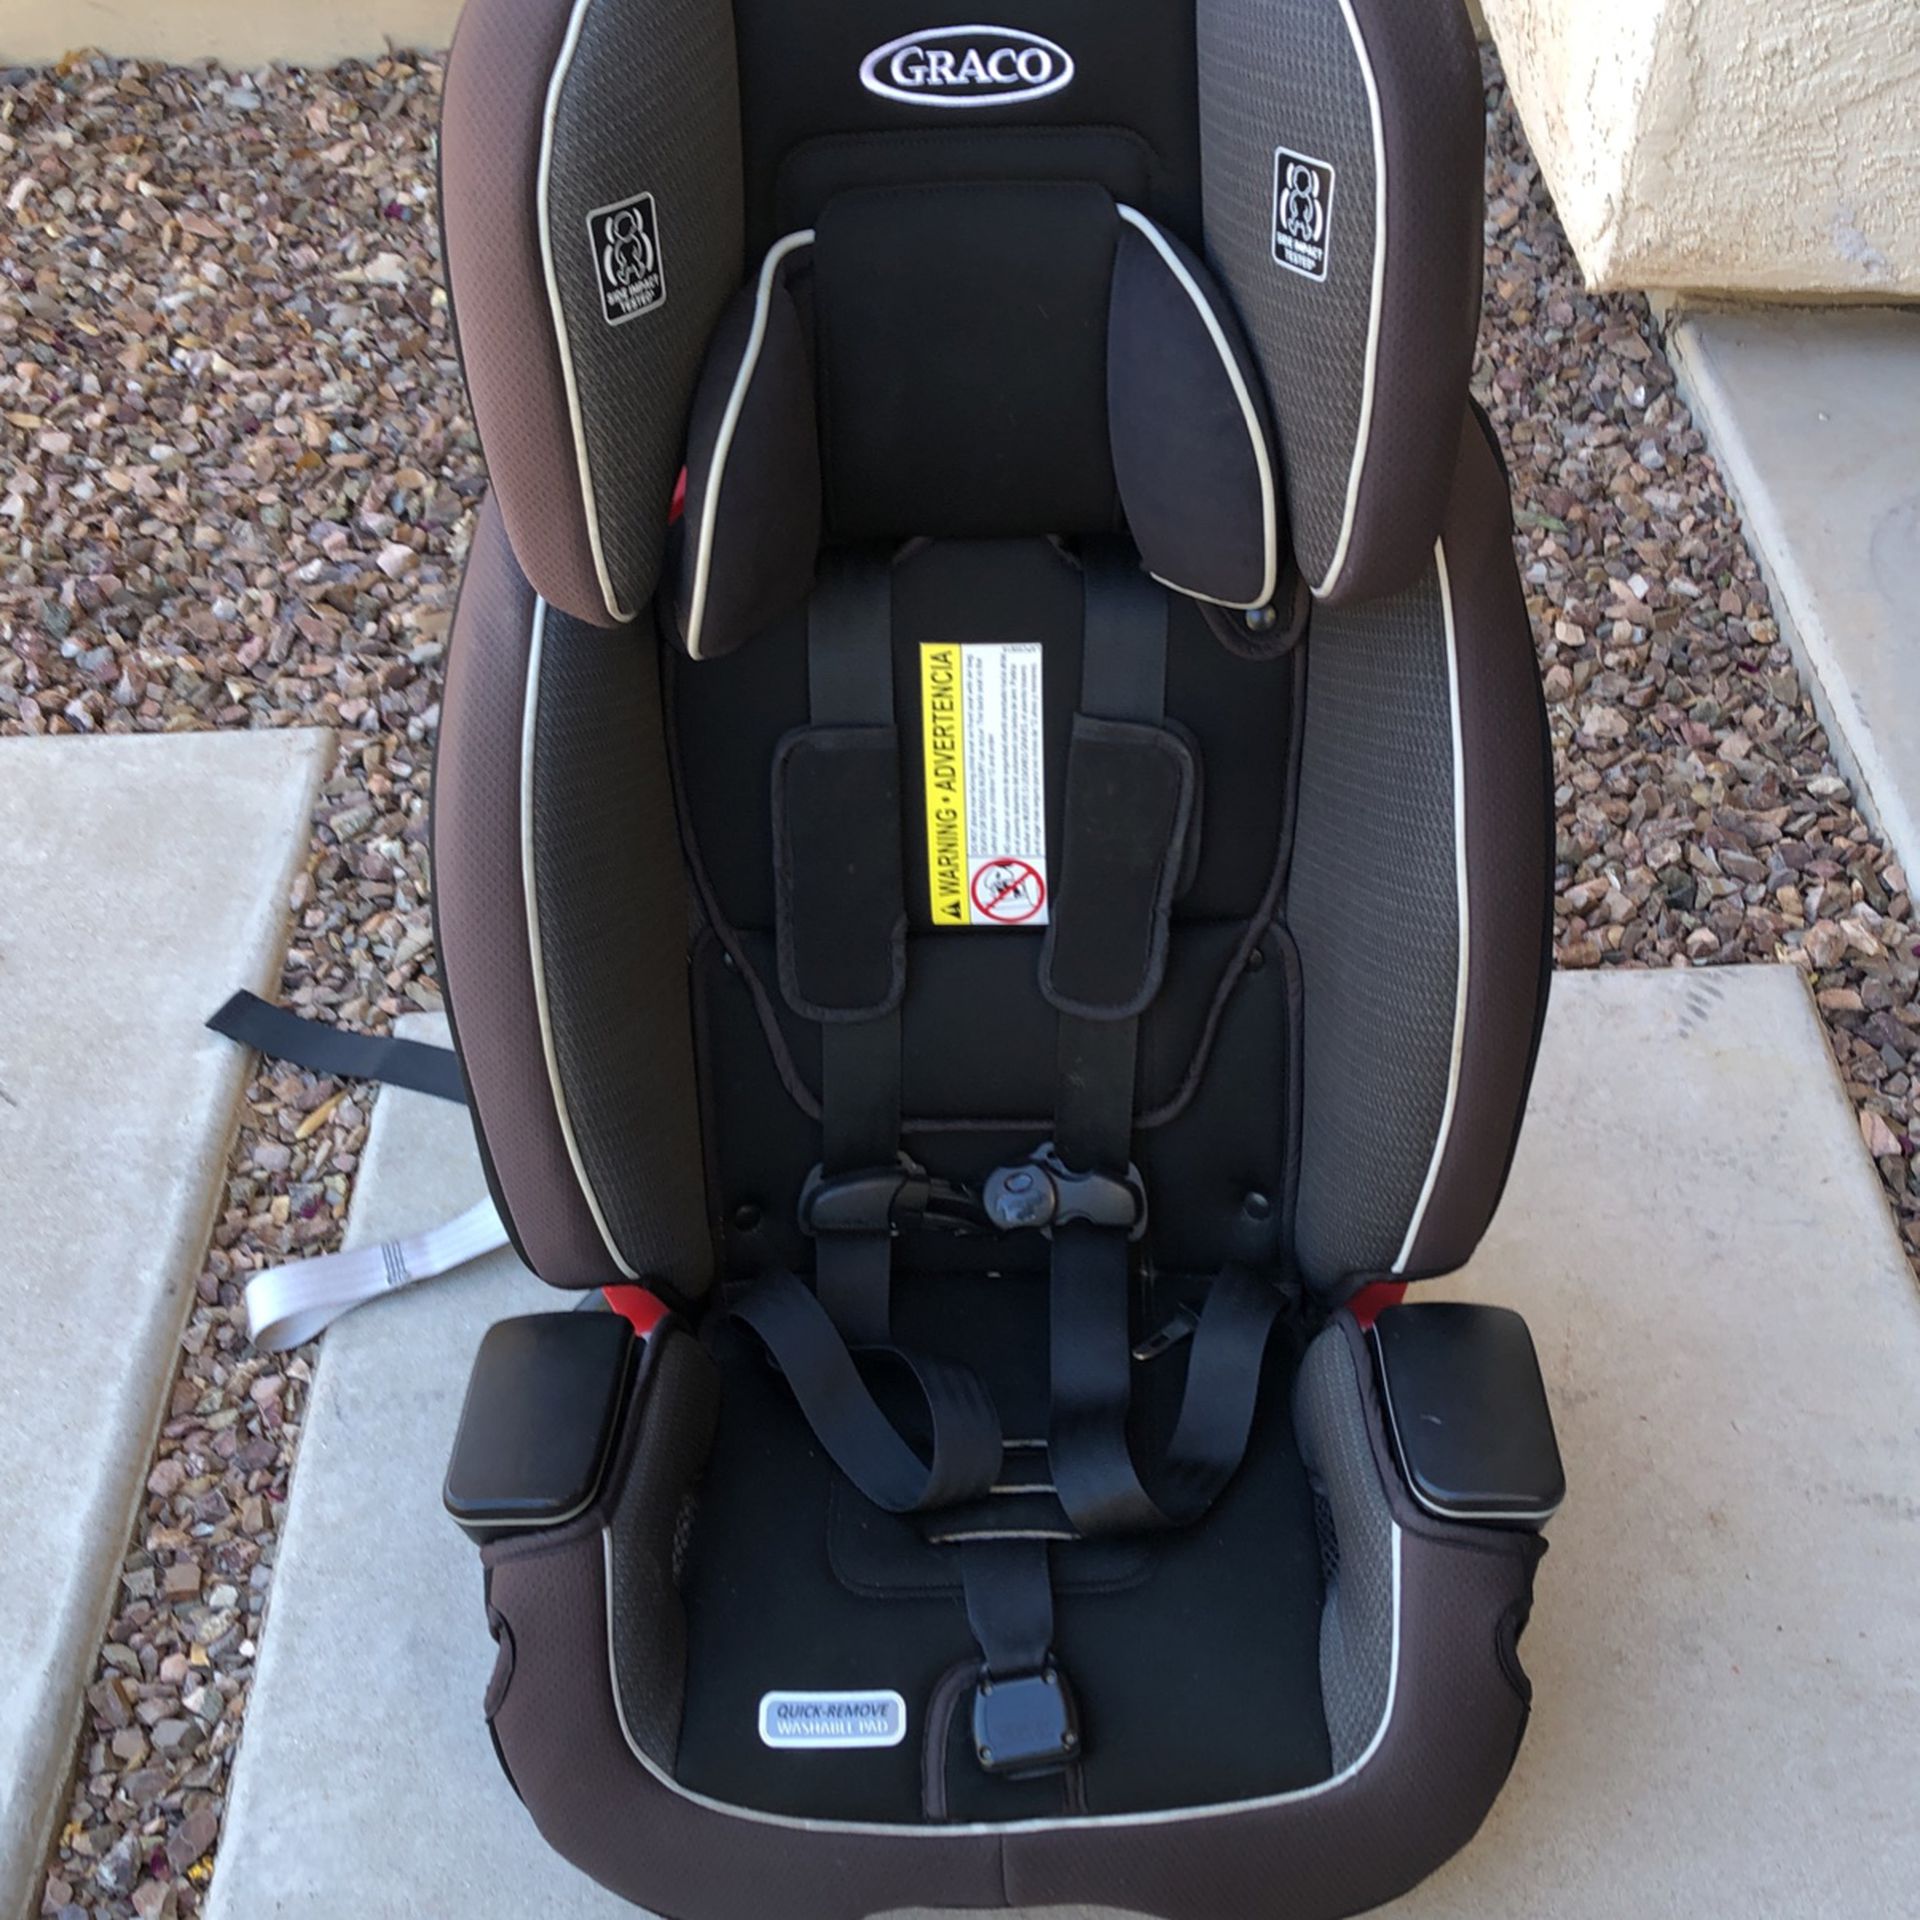 Graco Milestone in Car Seat With Adjustable Headrest, Toddler Infant  Gotham Fashion for Sale in Chandler, AZ OfferUp